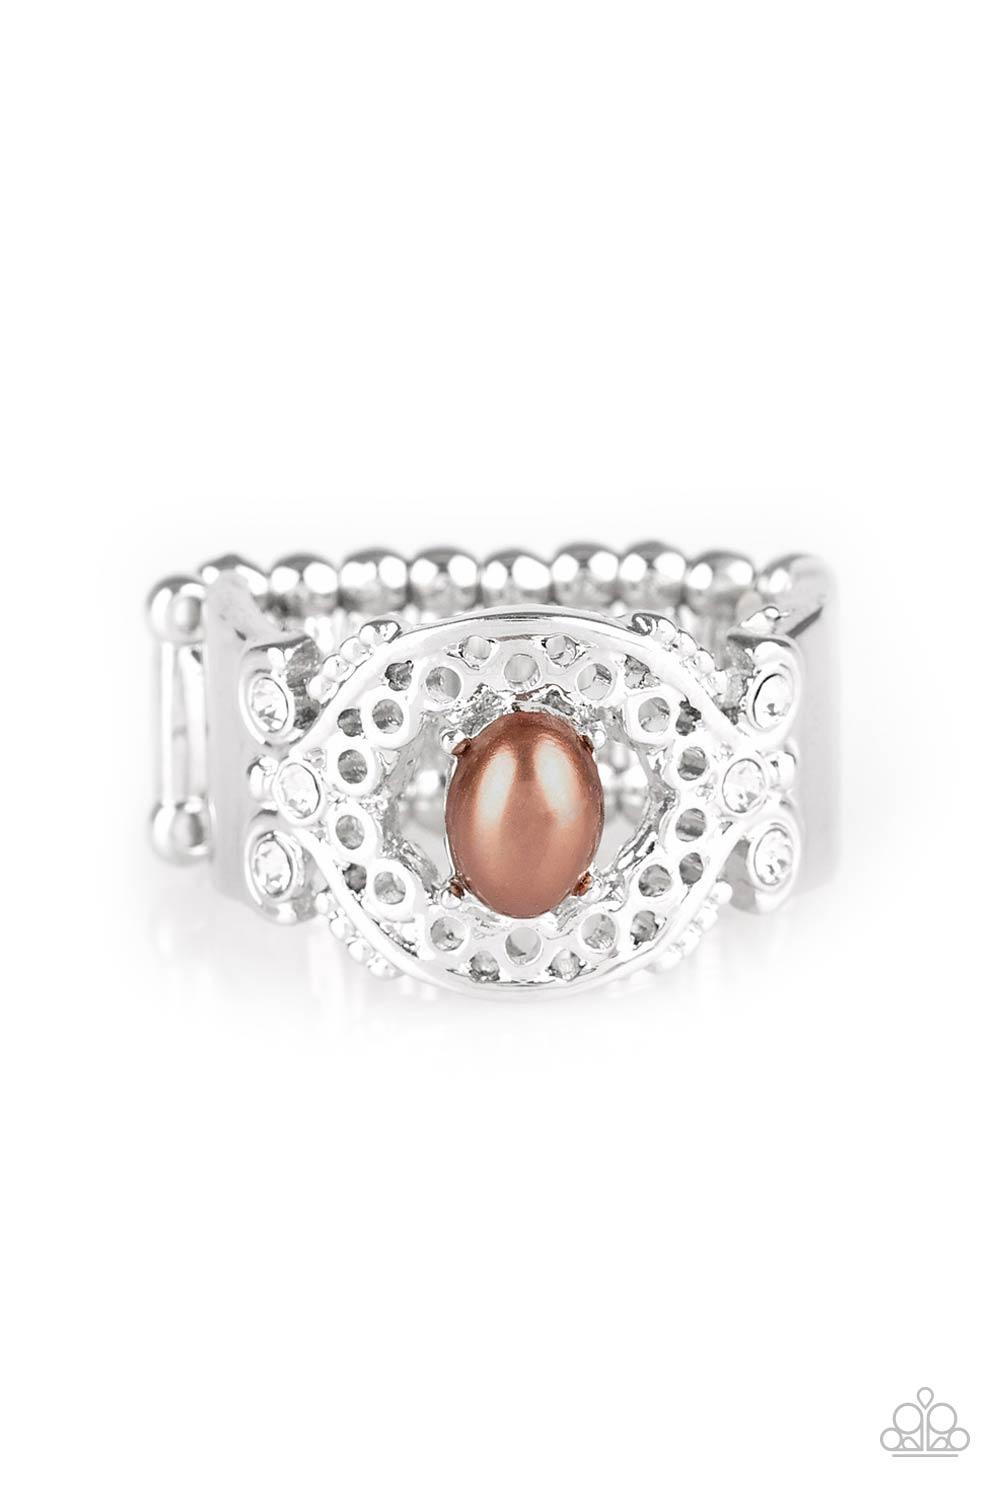 Paparazzi Accessories Mod Modest - Brown Dotted with glittery white rhinestones, an airy filigreed silver band arcs across the finger in a regal fashion. A pearly brown bead is pressed into the center of the band for a timeless finish. Features a stretchy